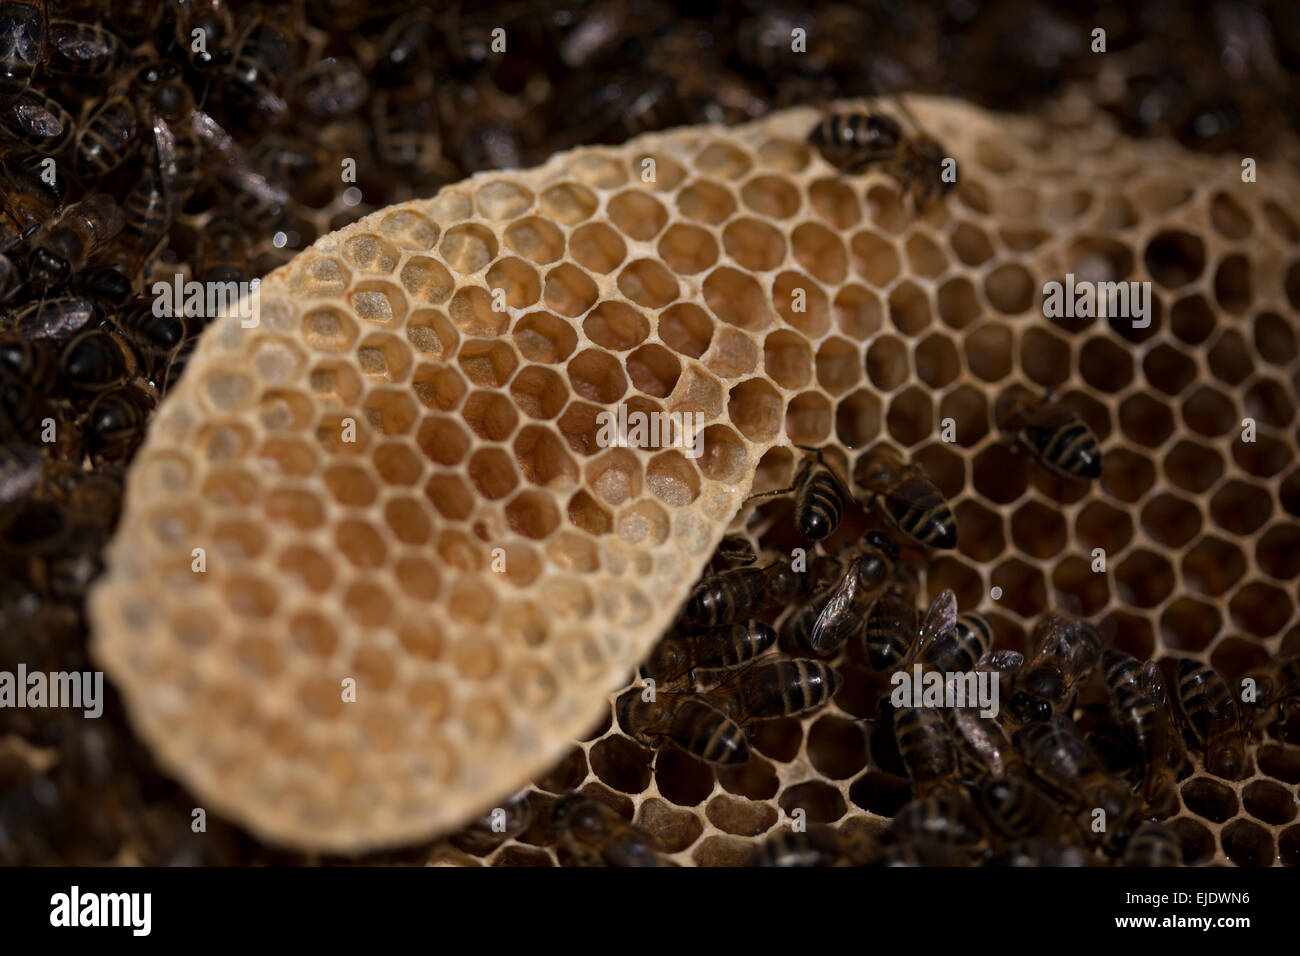 An empty honey comb in a beehive of the apiary of Puremiel beekeepers in Arcos de la Frontera, Cadiz province, Andalusia, Spain Stock Photo